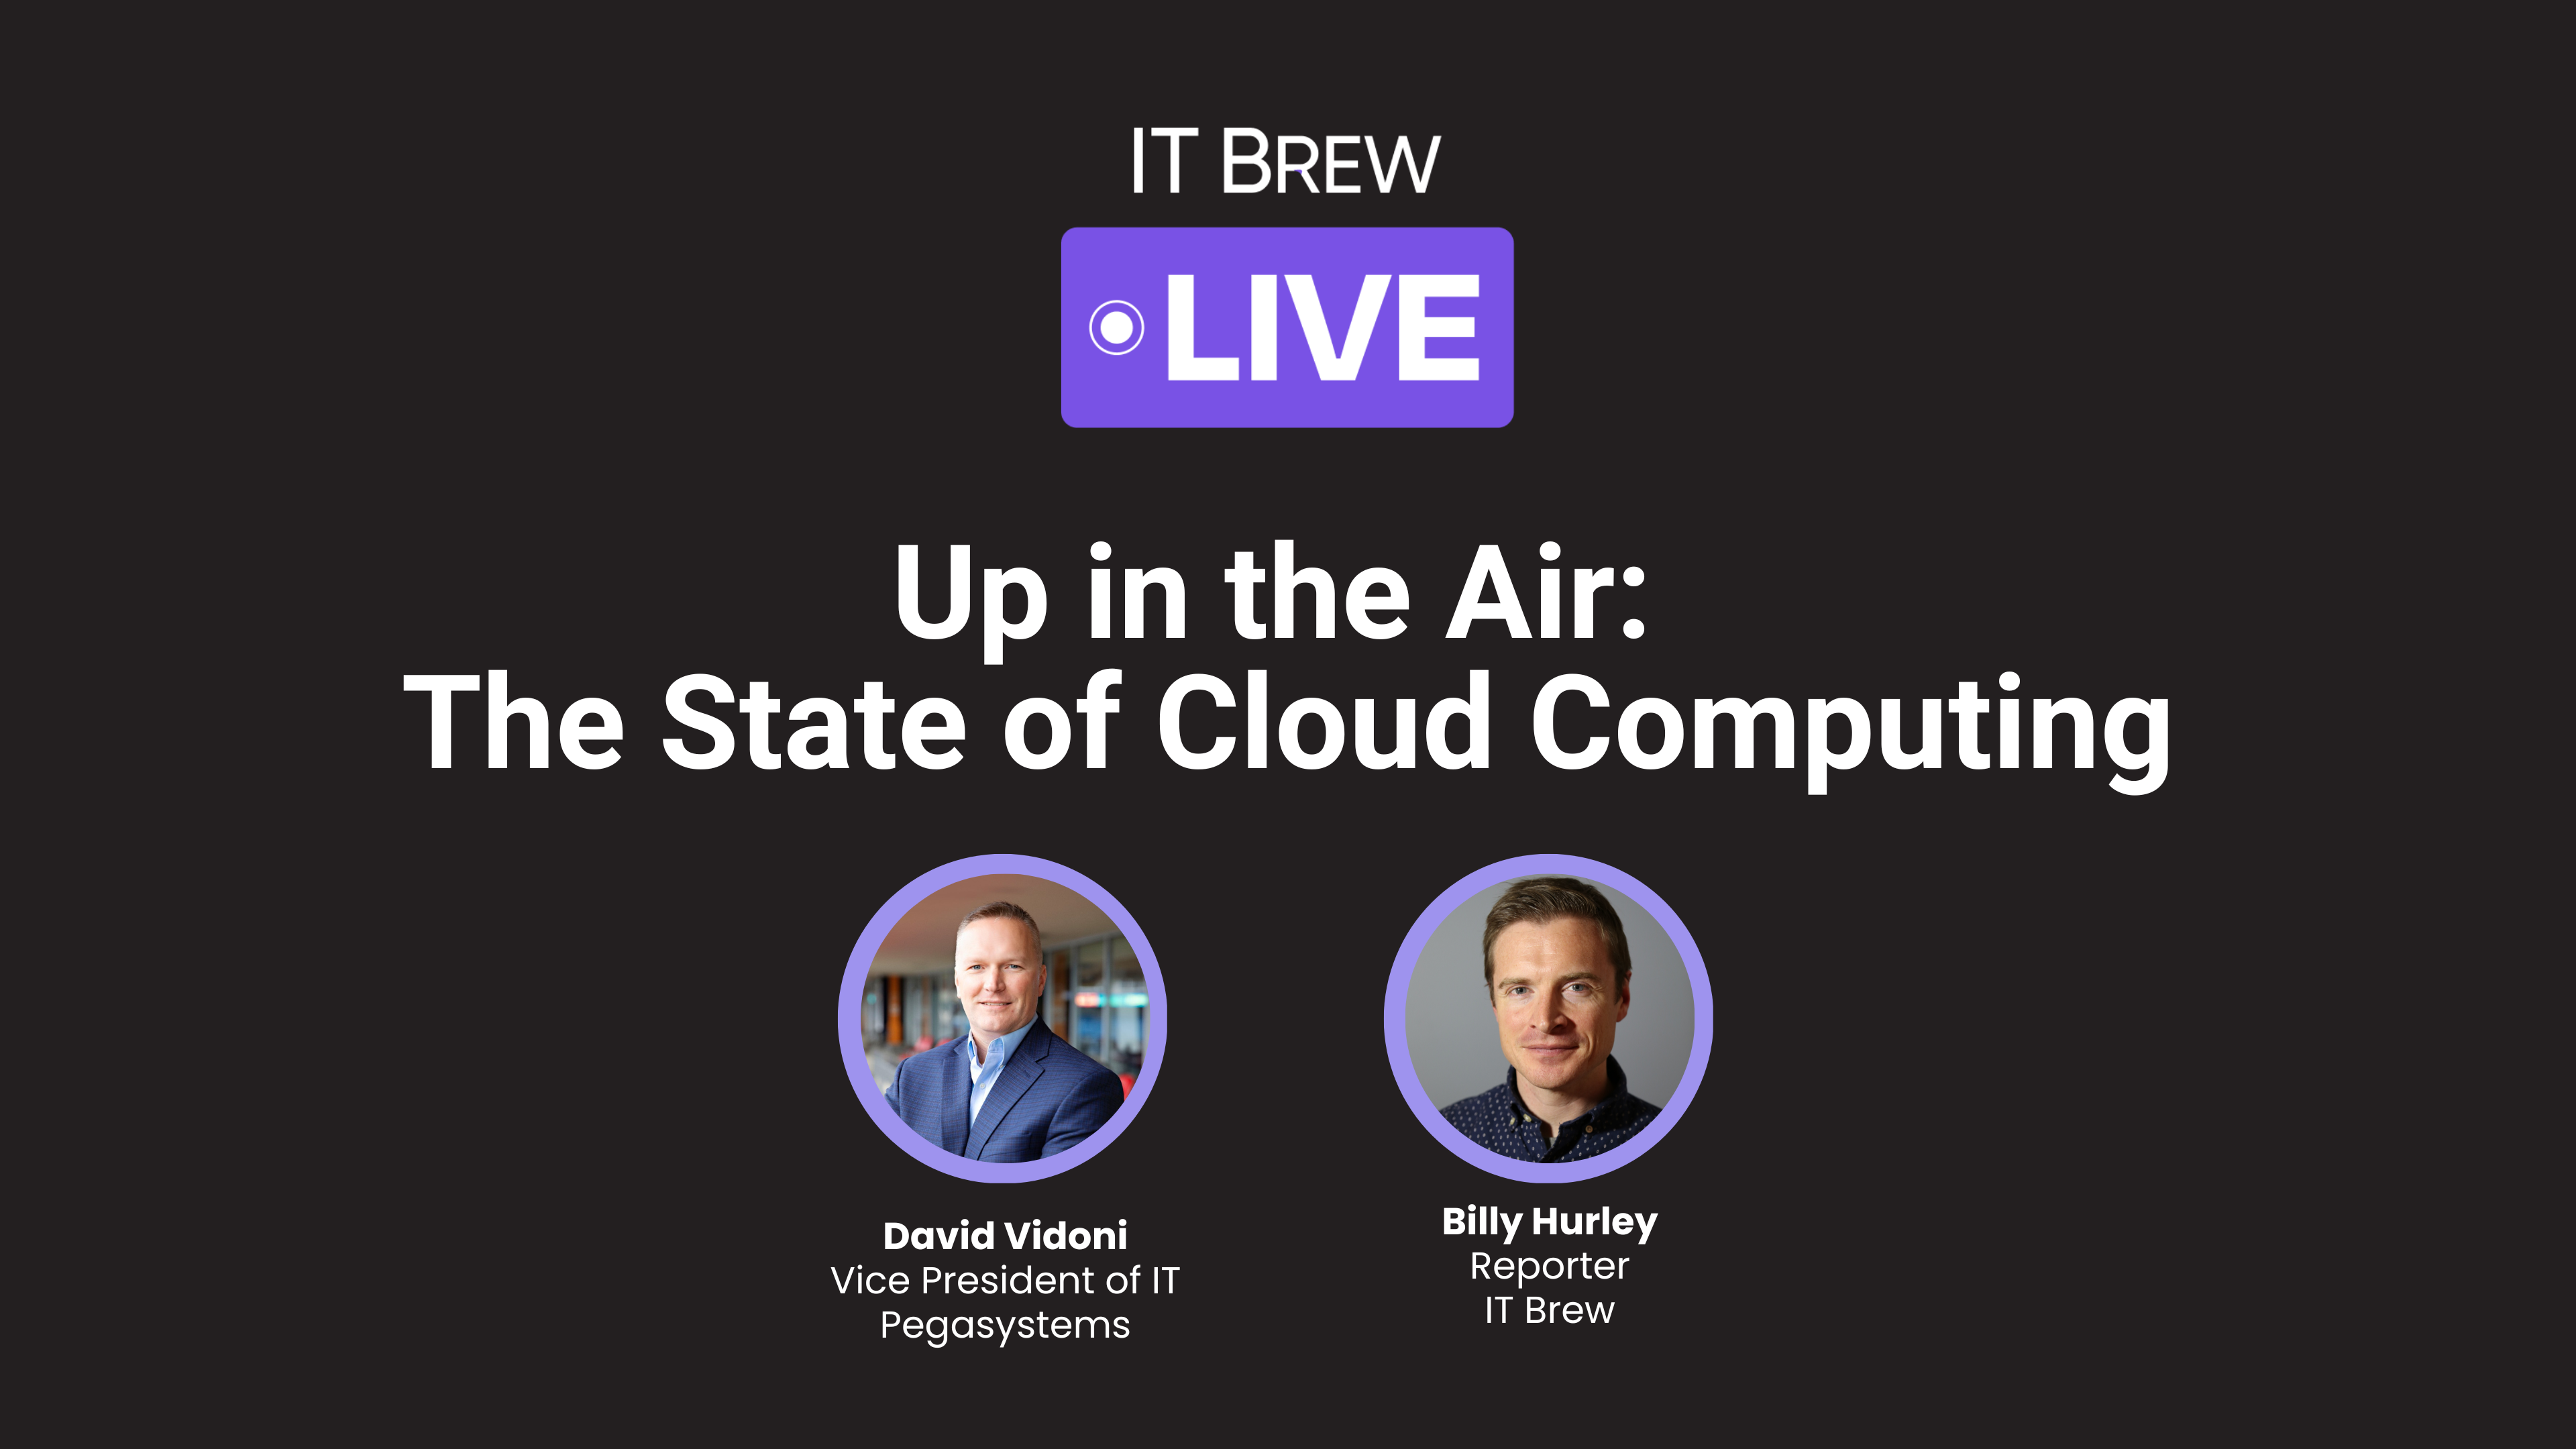 IT Brew virtual event "Up in the Air: The State of Cloud Computing" title above two presenter headshots